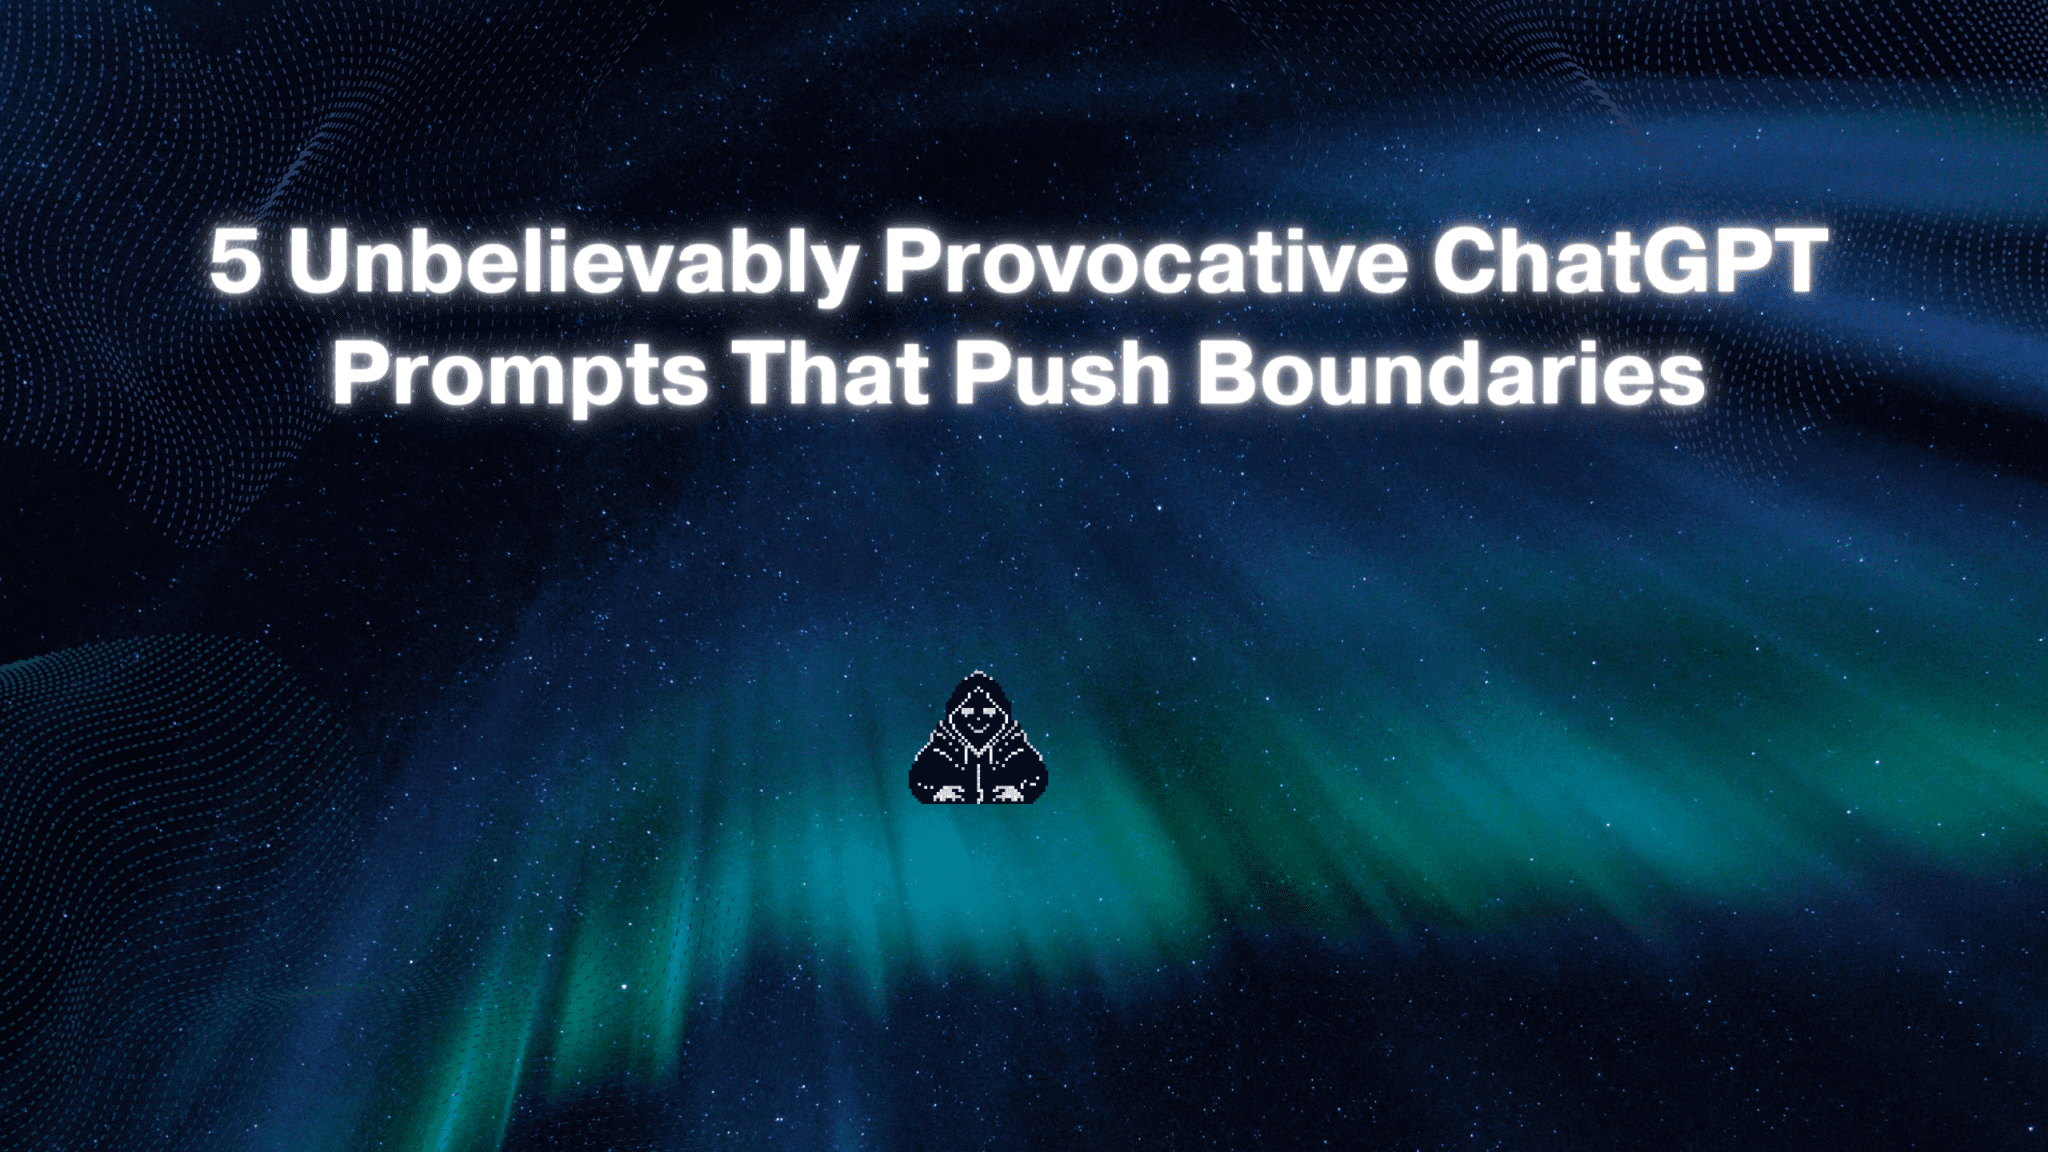 5 Unbelievably Provocative ChatGPT Prompts That Push Boundaries